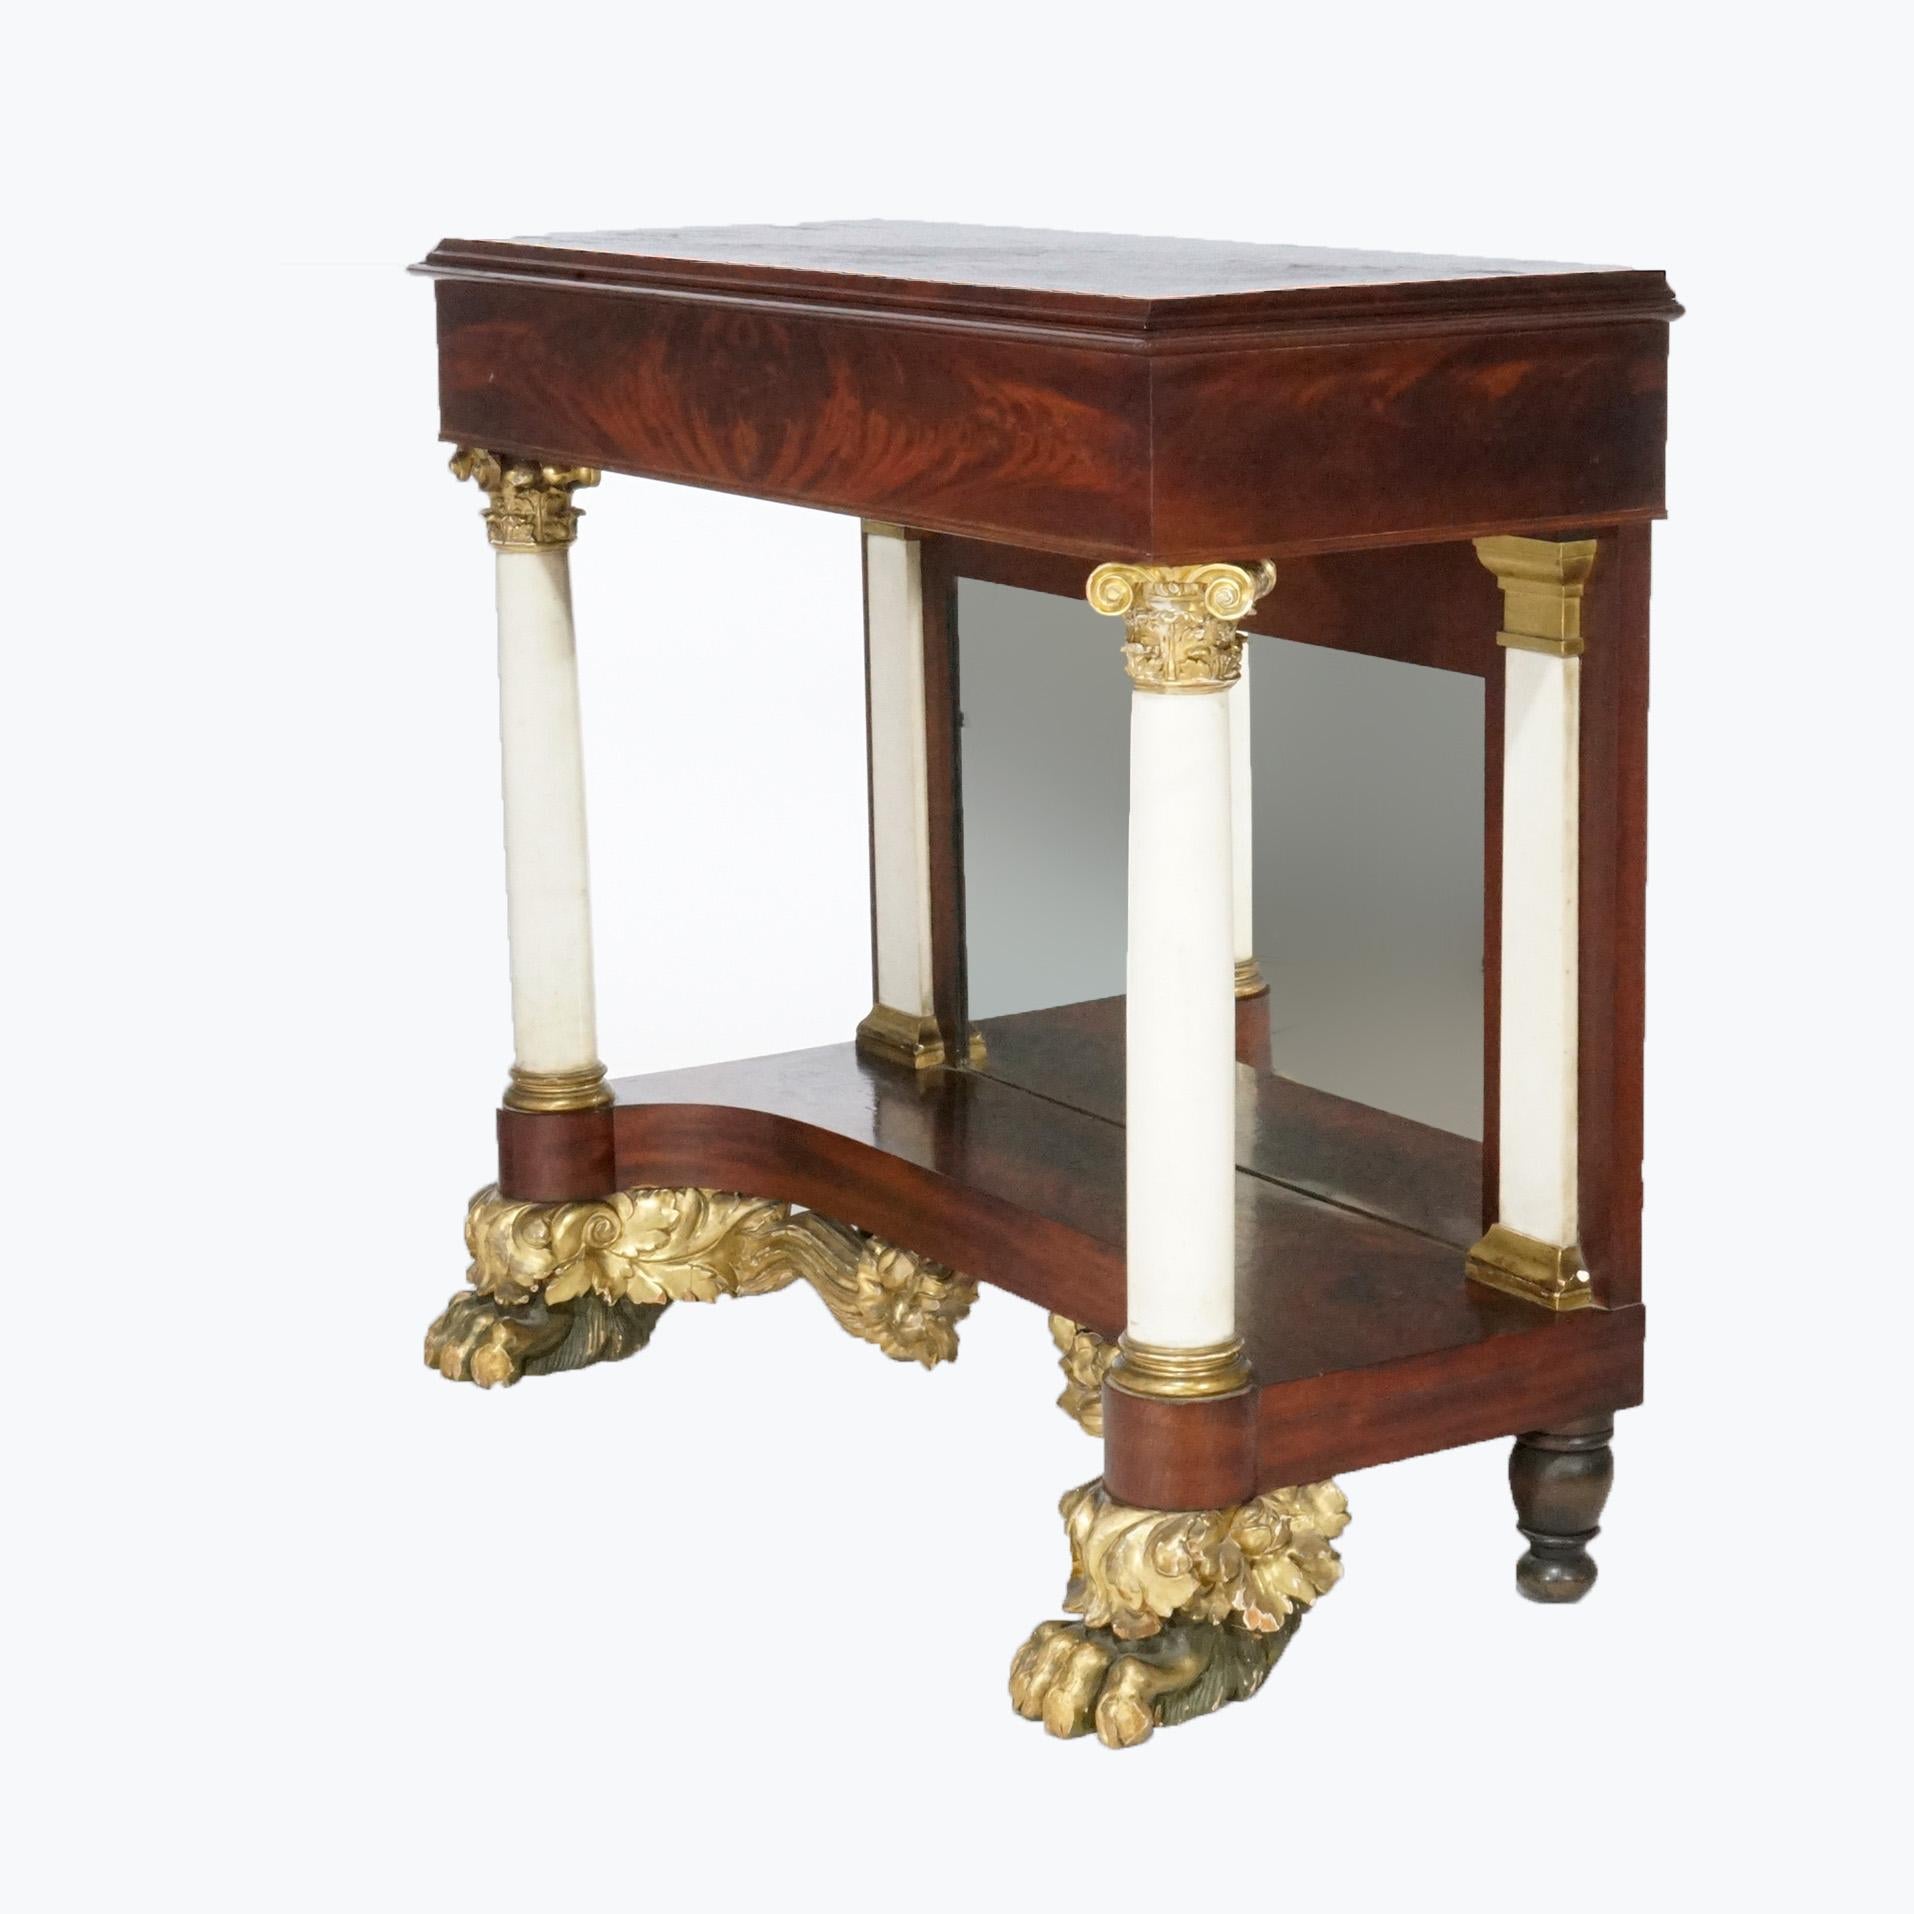 Neoclassical Antique Greco American Empire Flame Mahogany, Marble & Gilt Pier Table, C1830